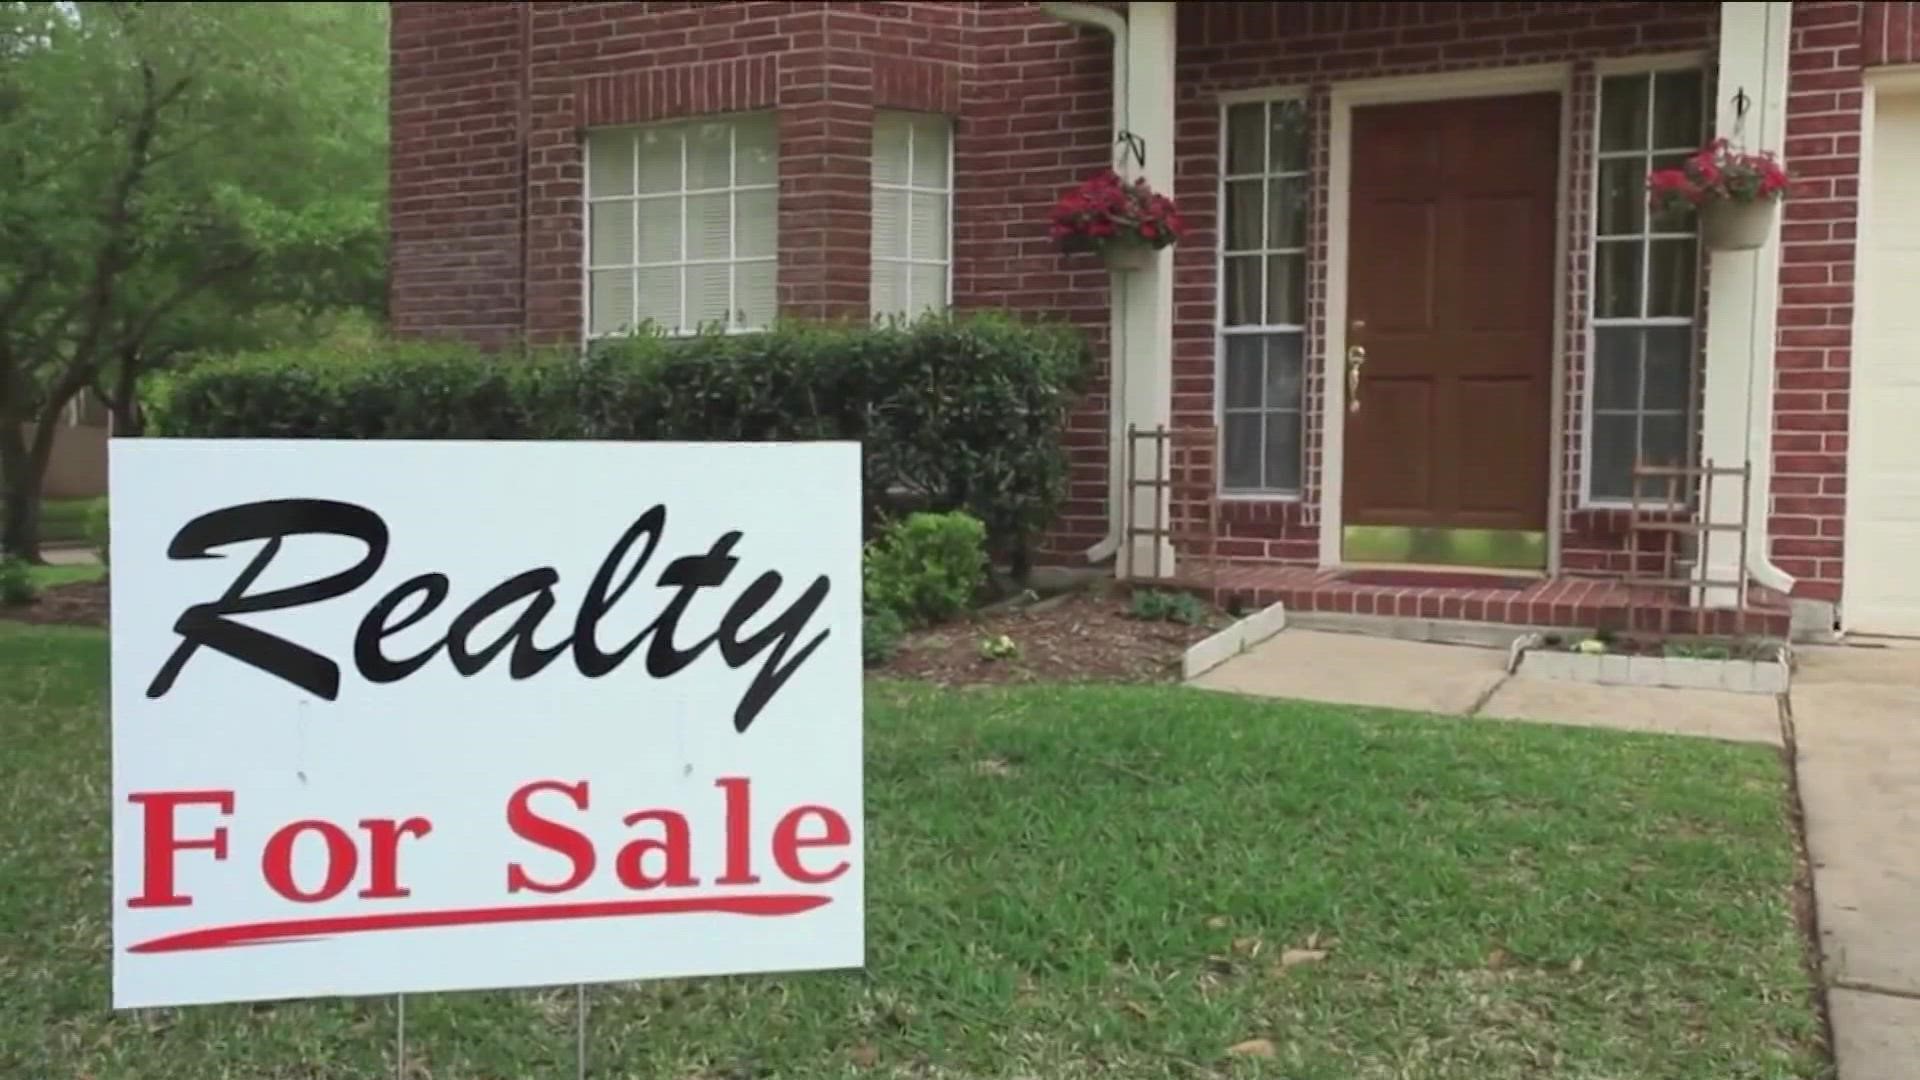 A new report says sales are slowing down and the housing market is expected to keep cooling off this year.